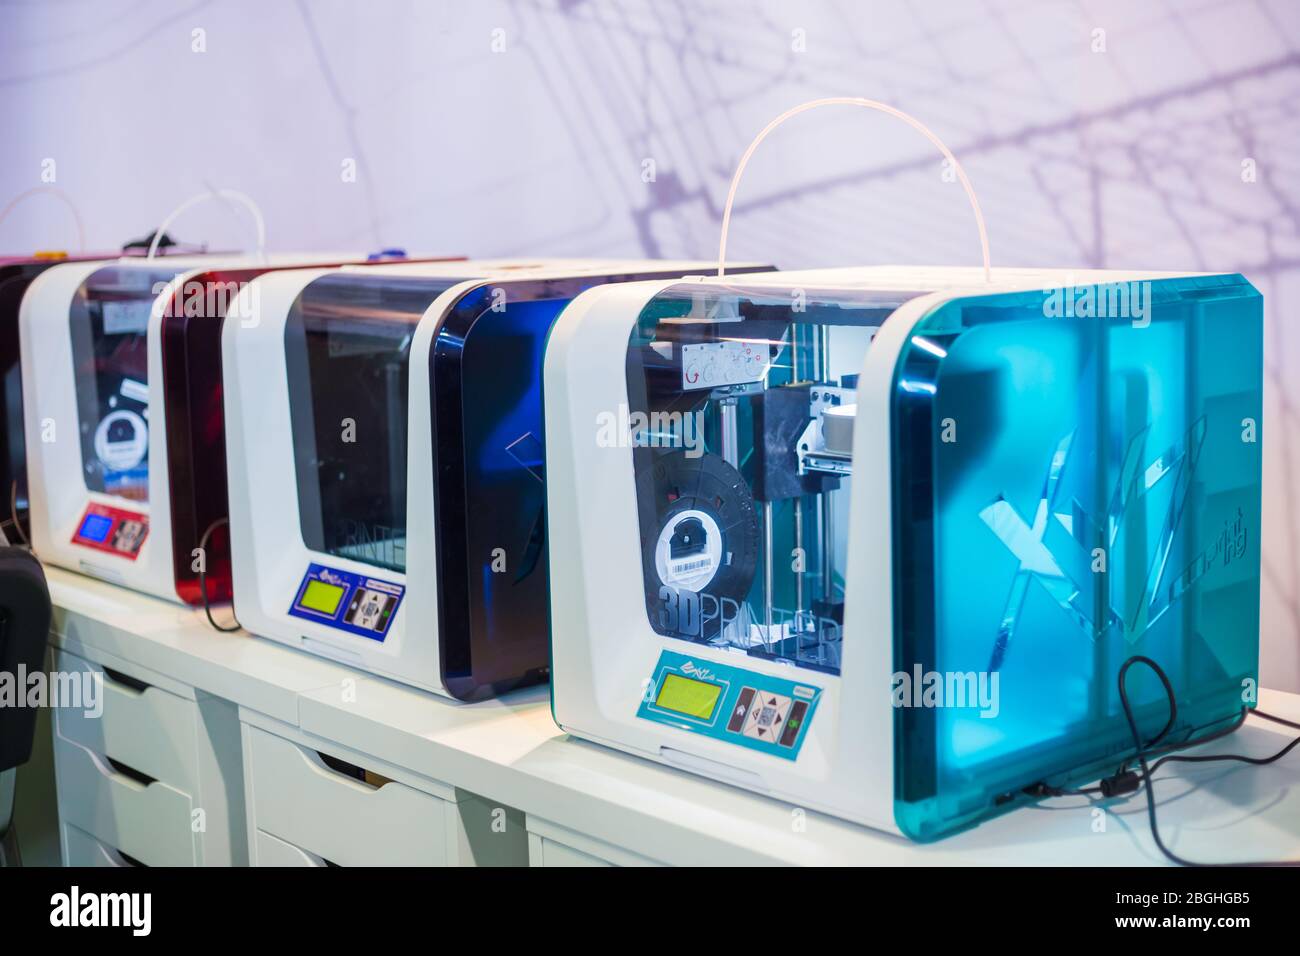 MOSCOW, RUSSIA - OCTOBER 12, 2018: 3D Print Expo - automatic 3D printers working at modern technology exhibition. 3D printing, additive technologies, Stock Photo